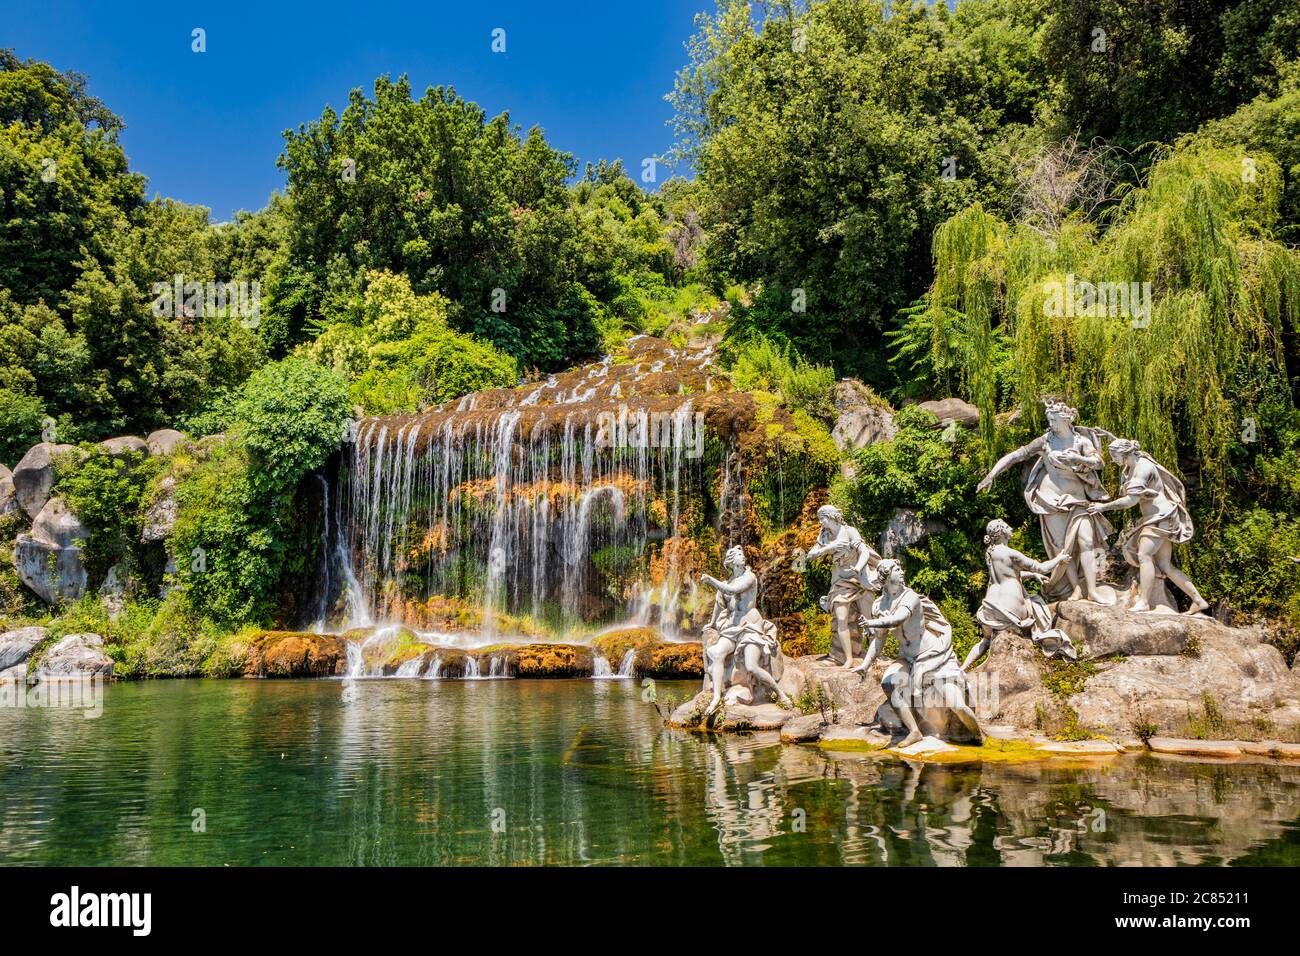 July 3, 2020 - Royal Palace of (Reggia di) Caserta - The large fountain with marble statues, waterfall and water features. The blue sky in summer. Tre Stock Photo